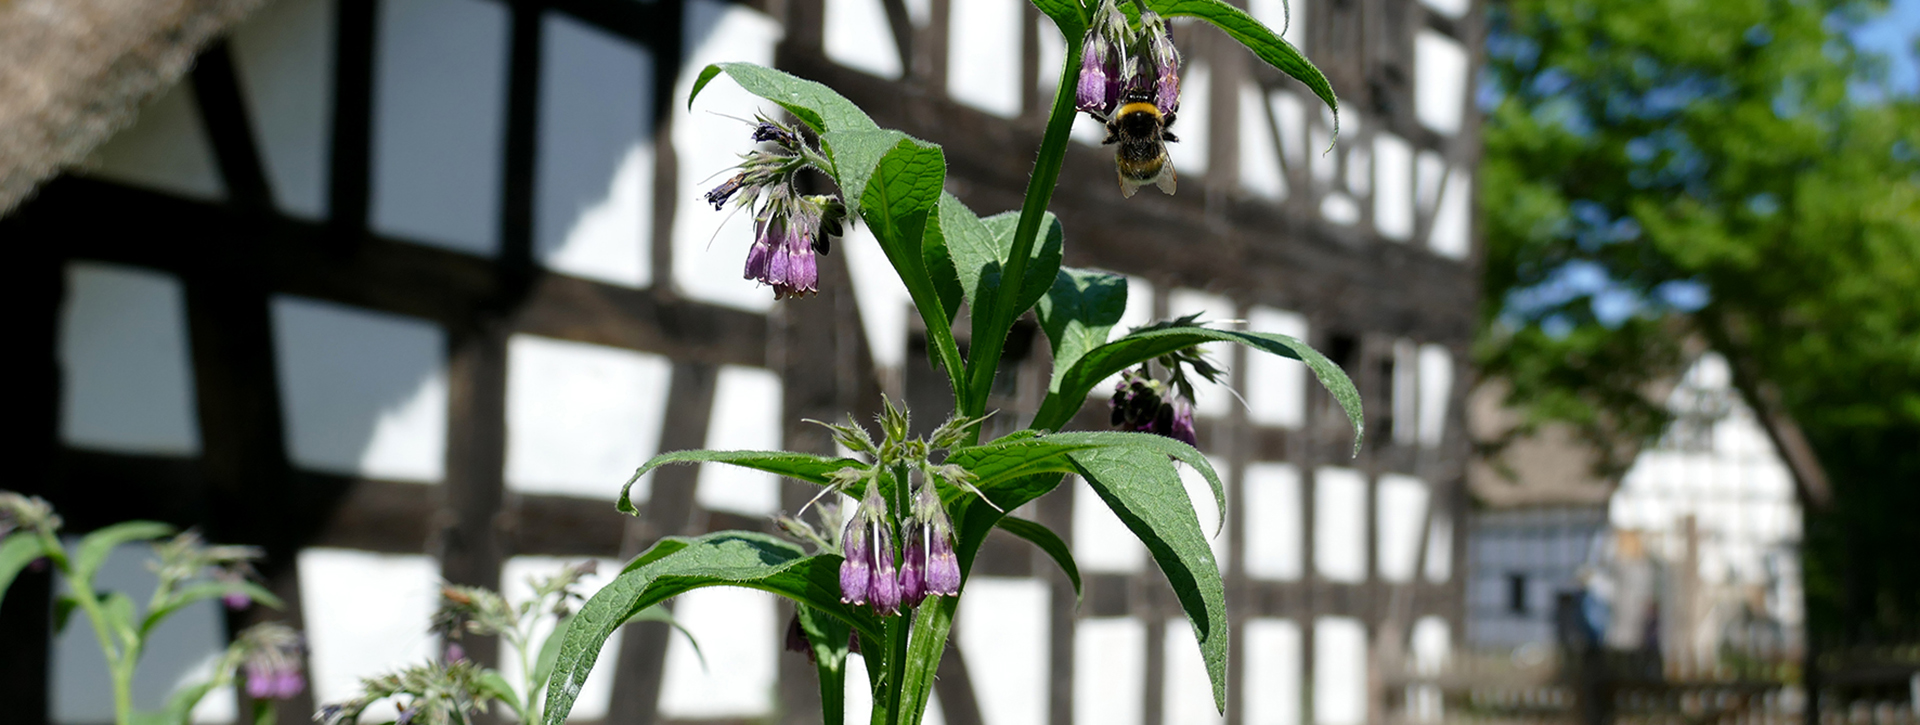 Plant with purple flowers and bees in front of a half-timbered house